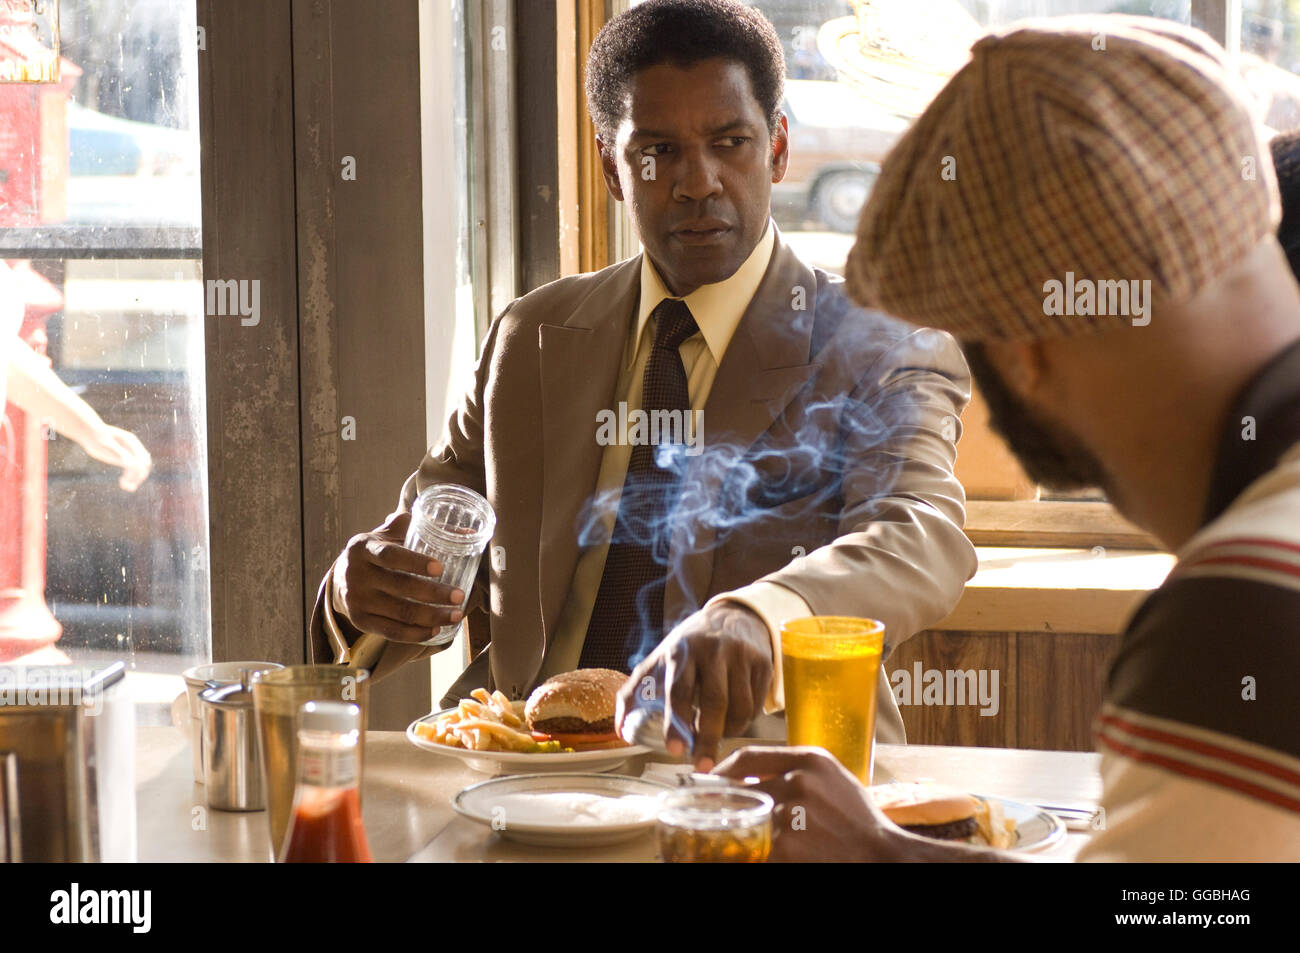 American Gangster / Gangster Frank Lucas (DENZEL WASHINGTON) discusses business with his brother Turner (COMMON) Regie: Ridley Scott aka. American Gangster Stock Photo